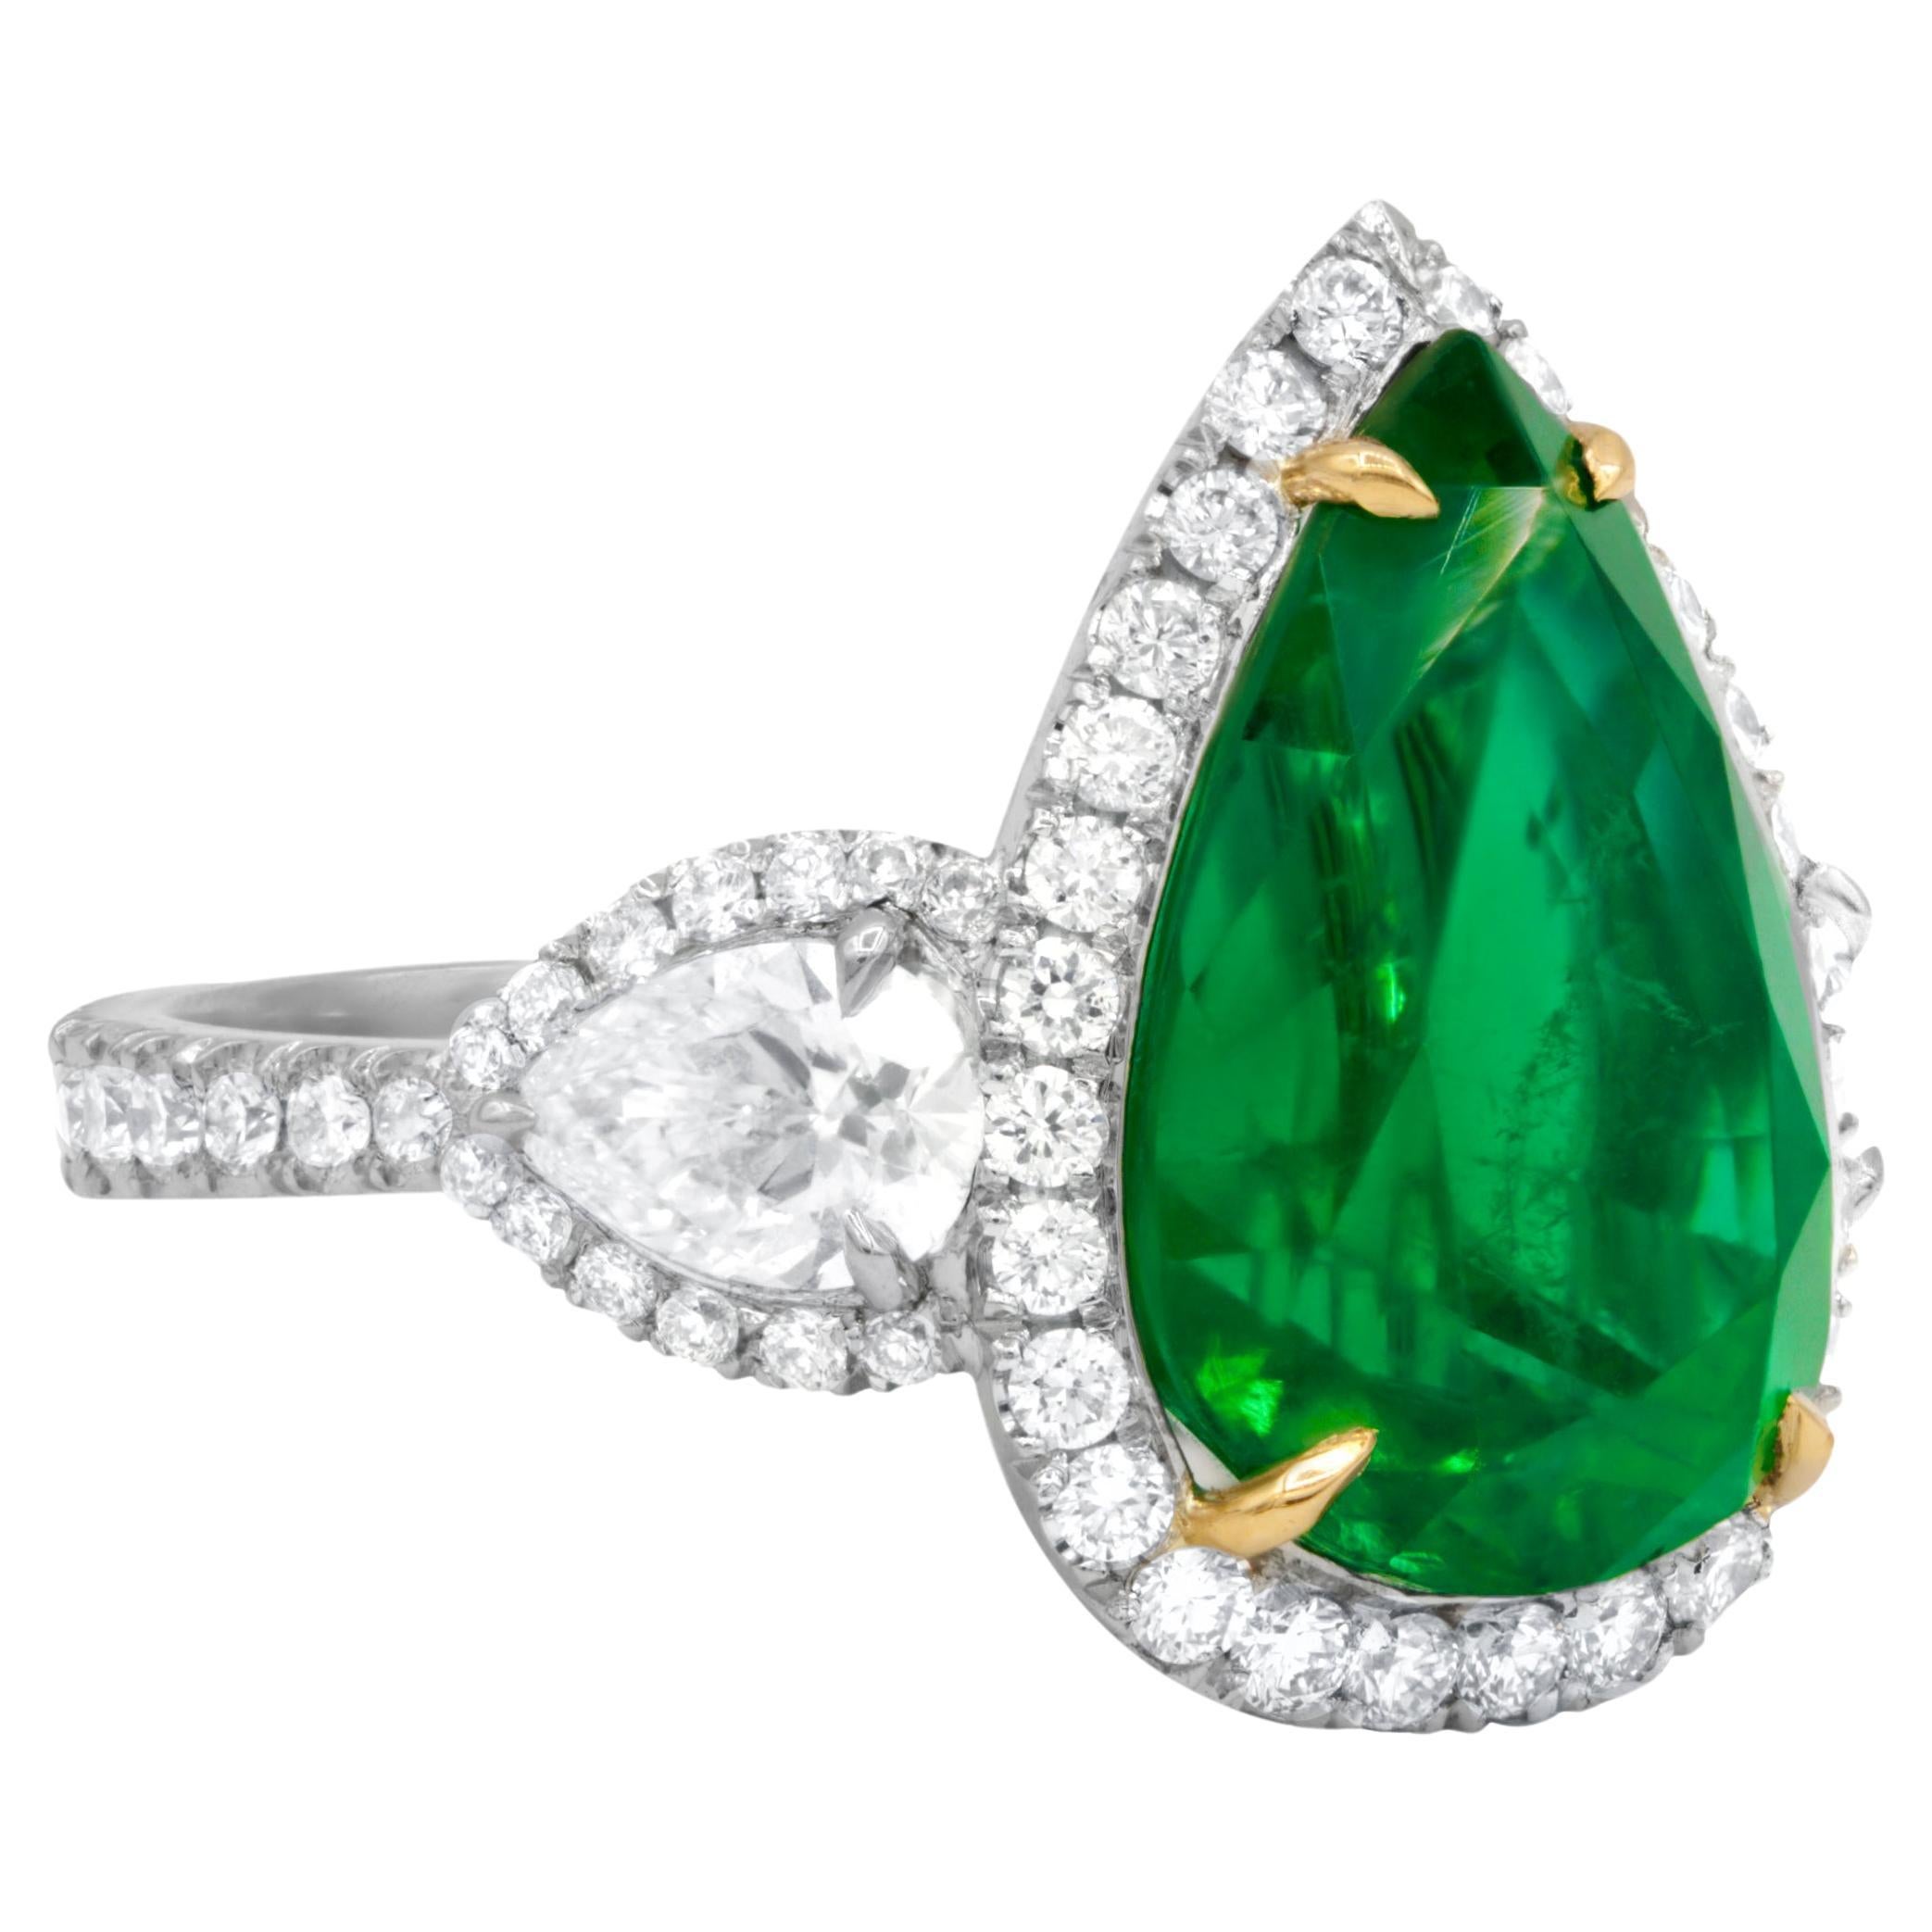 Diana M. Platinum and 18kt yellow gold emerald diamond ring a 8.78 ct emerald For Sale